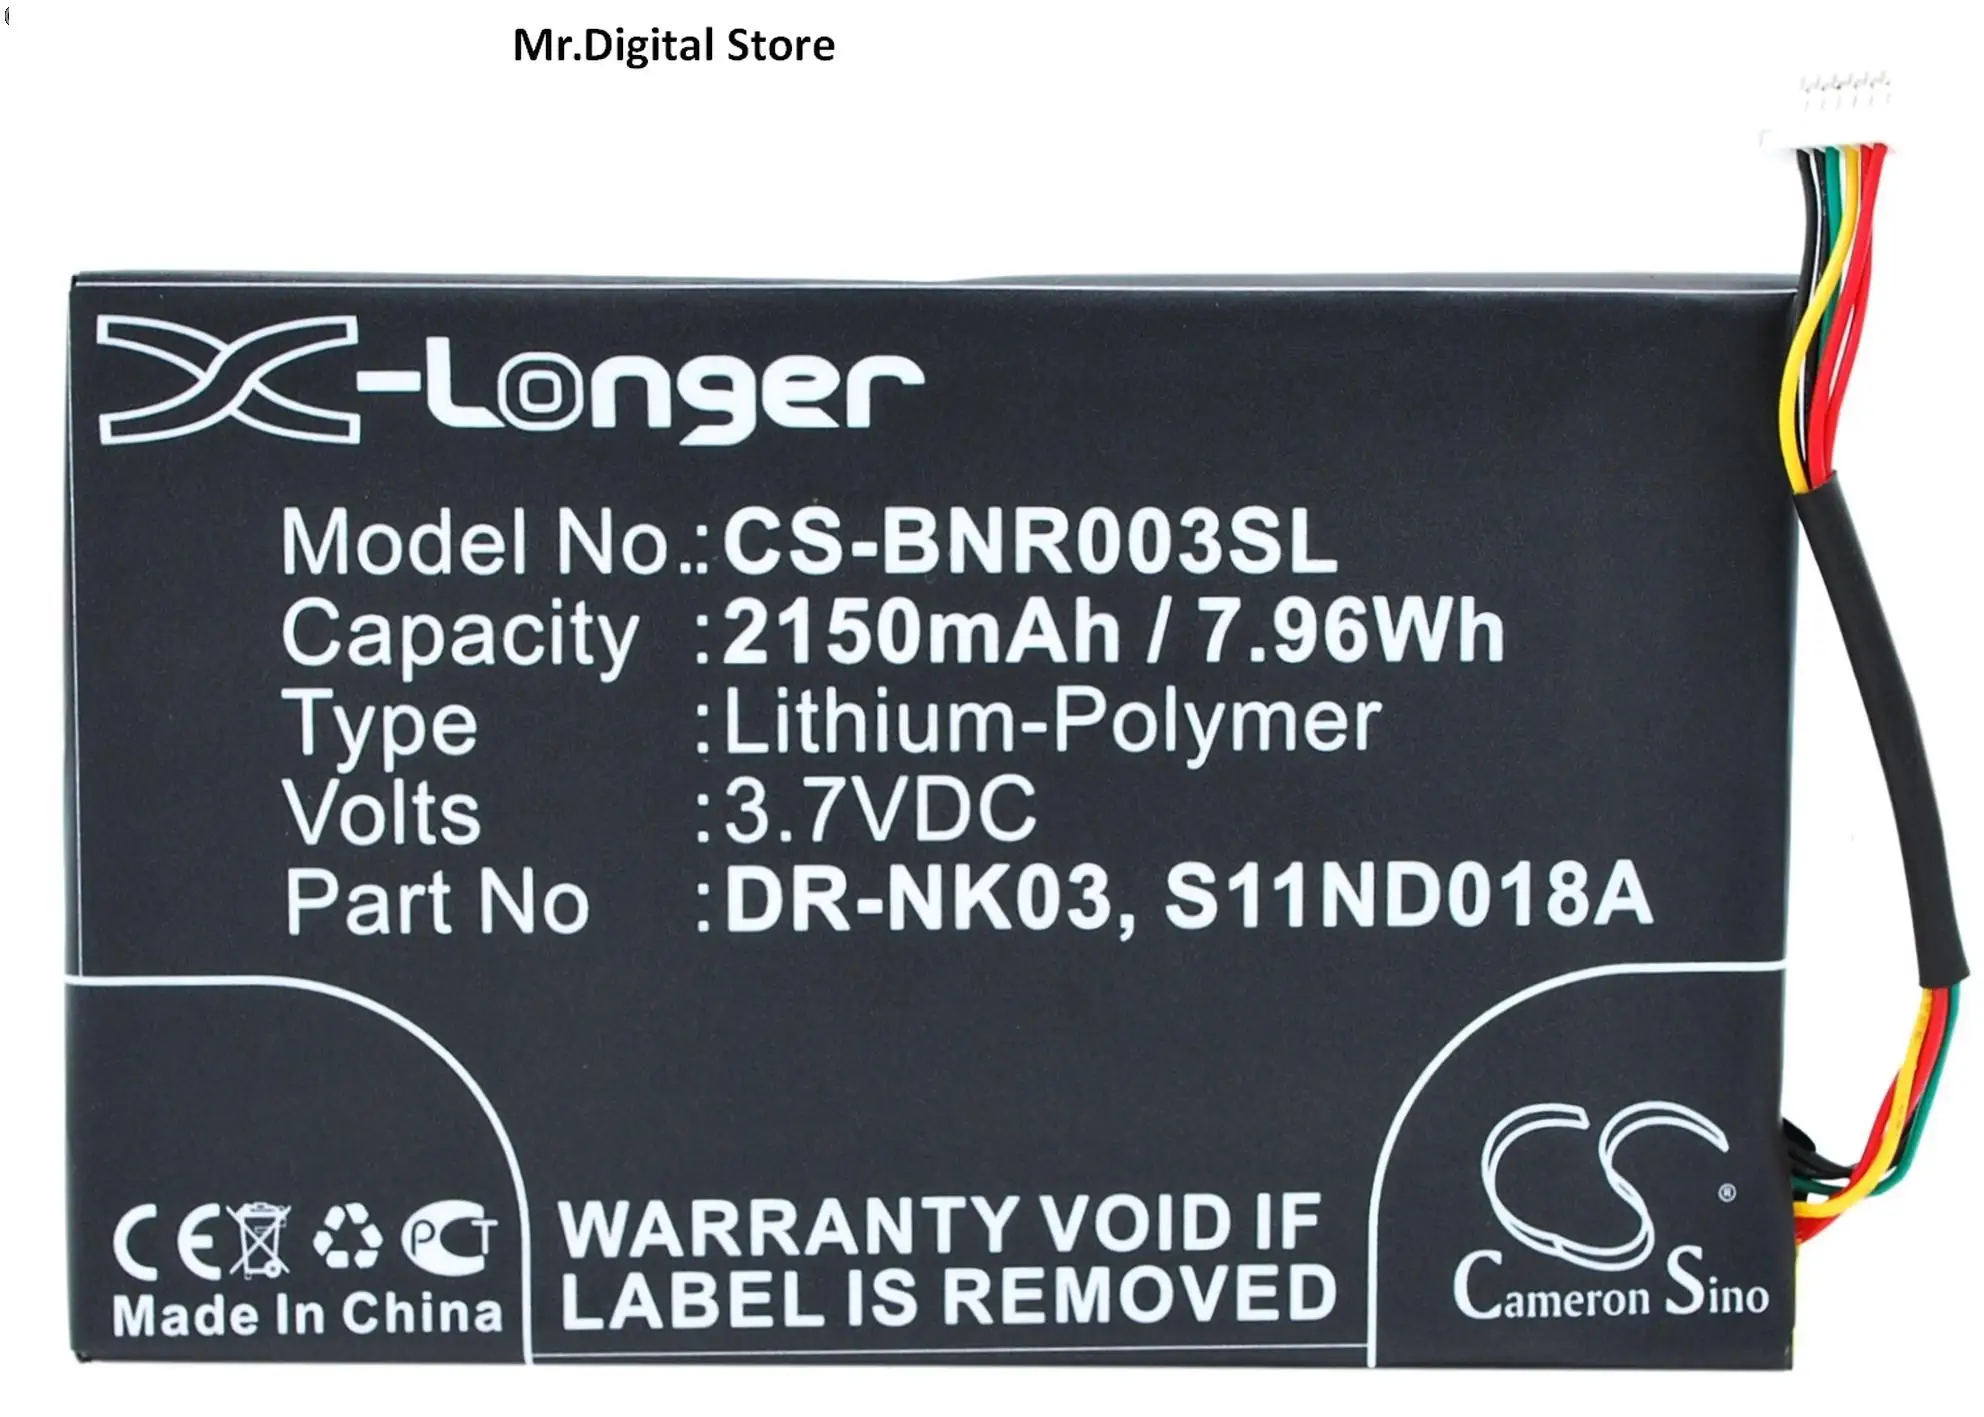 

Cameron Sino 2150mAh Battery DR-NK03,S11ND018A for Barnes&Noble BNRV300,BNTV350,Nook Simple Touch, Simple Touch 6",